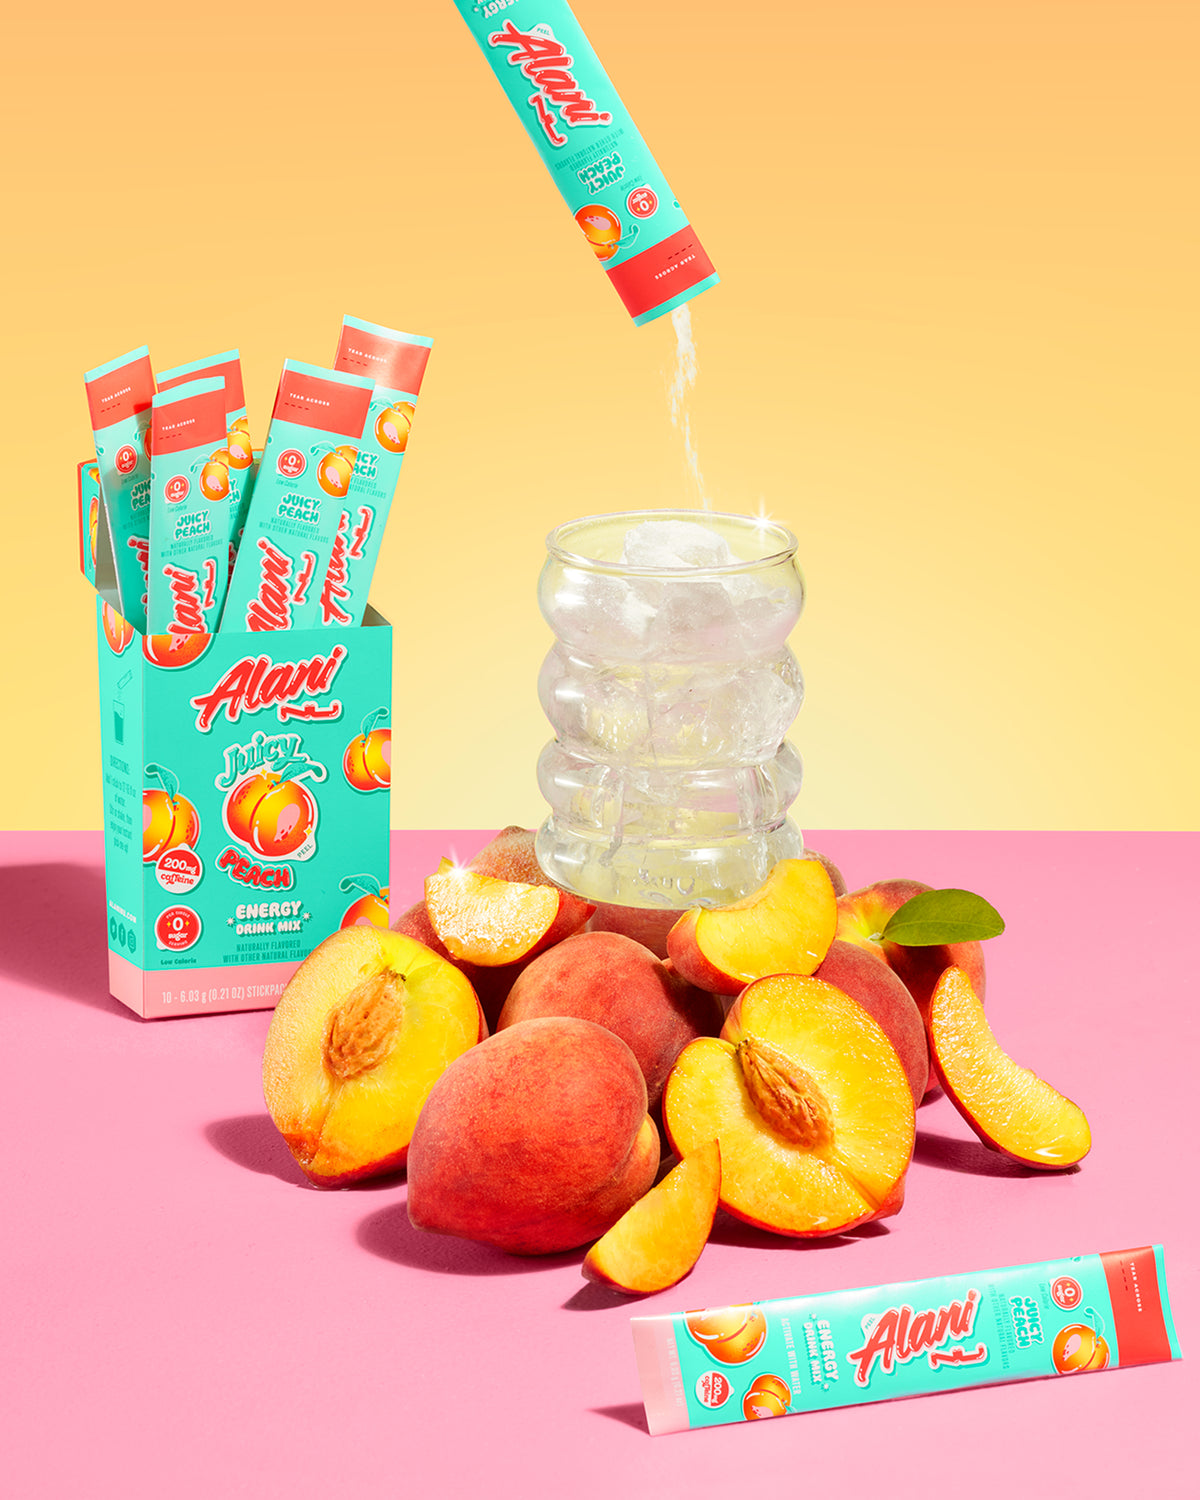 A display of Energy Sticks in Juicy Peach next to a pile of Peaches.